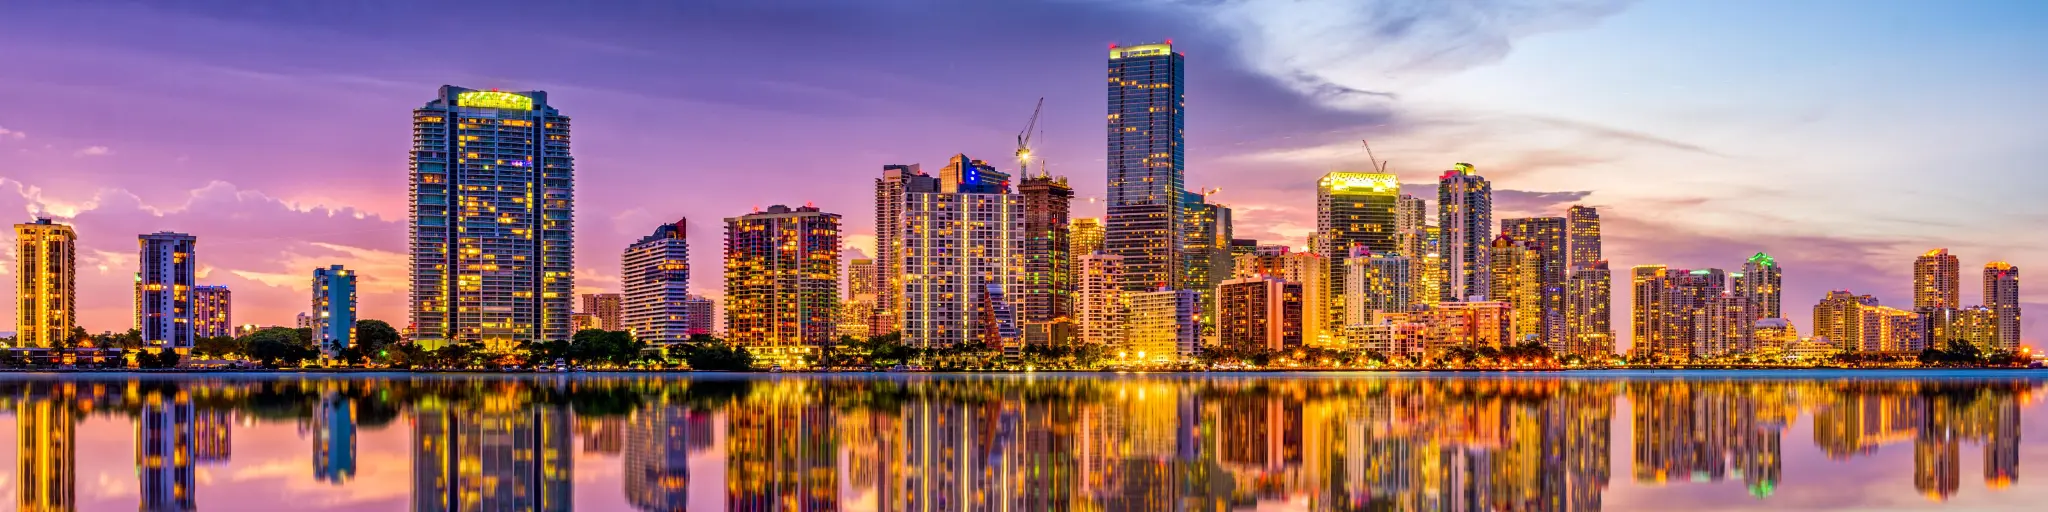 Colorful lit-up skyline of the city reflected on the water during a pink and purple sunset